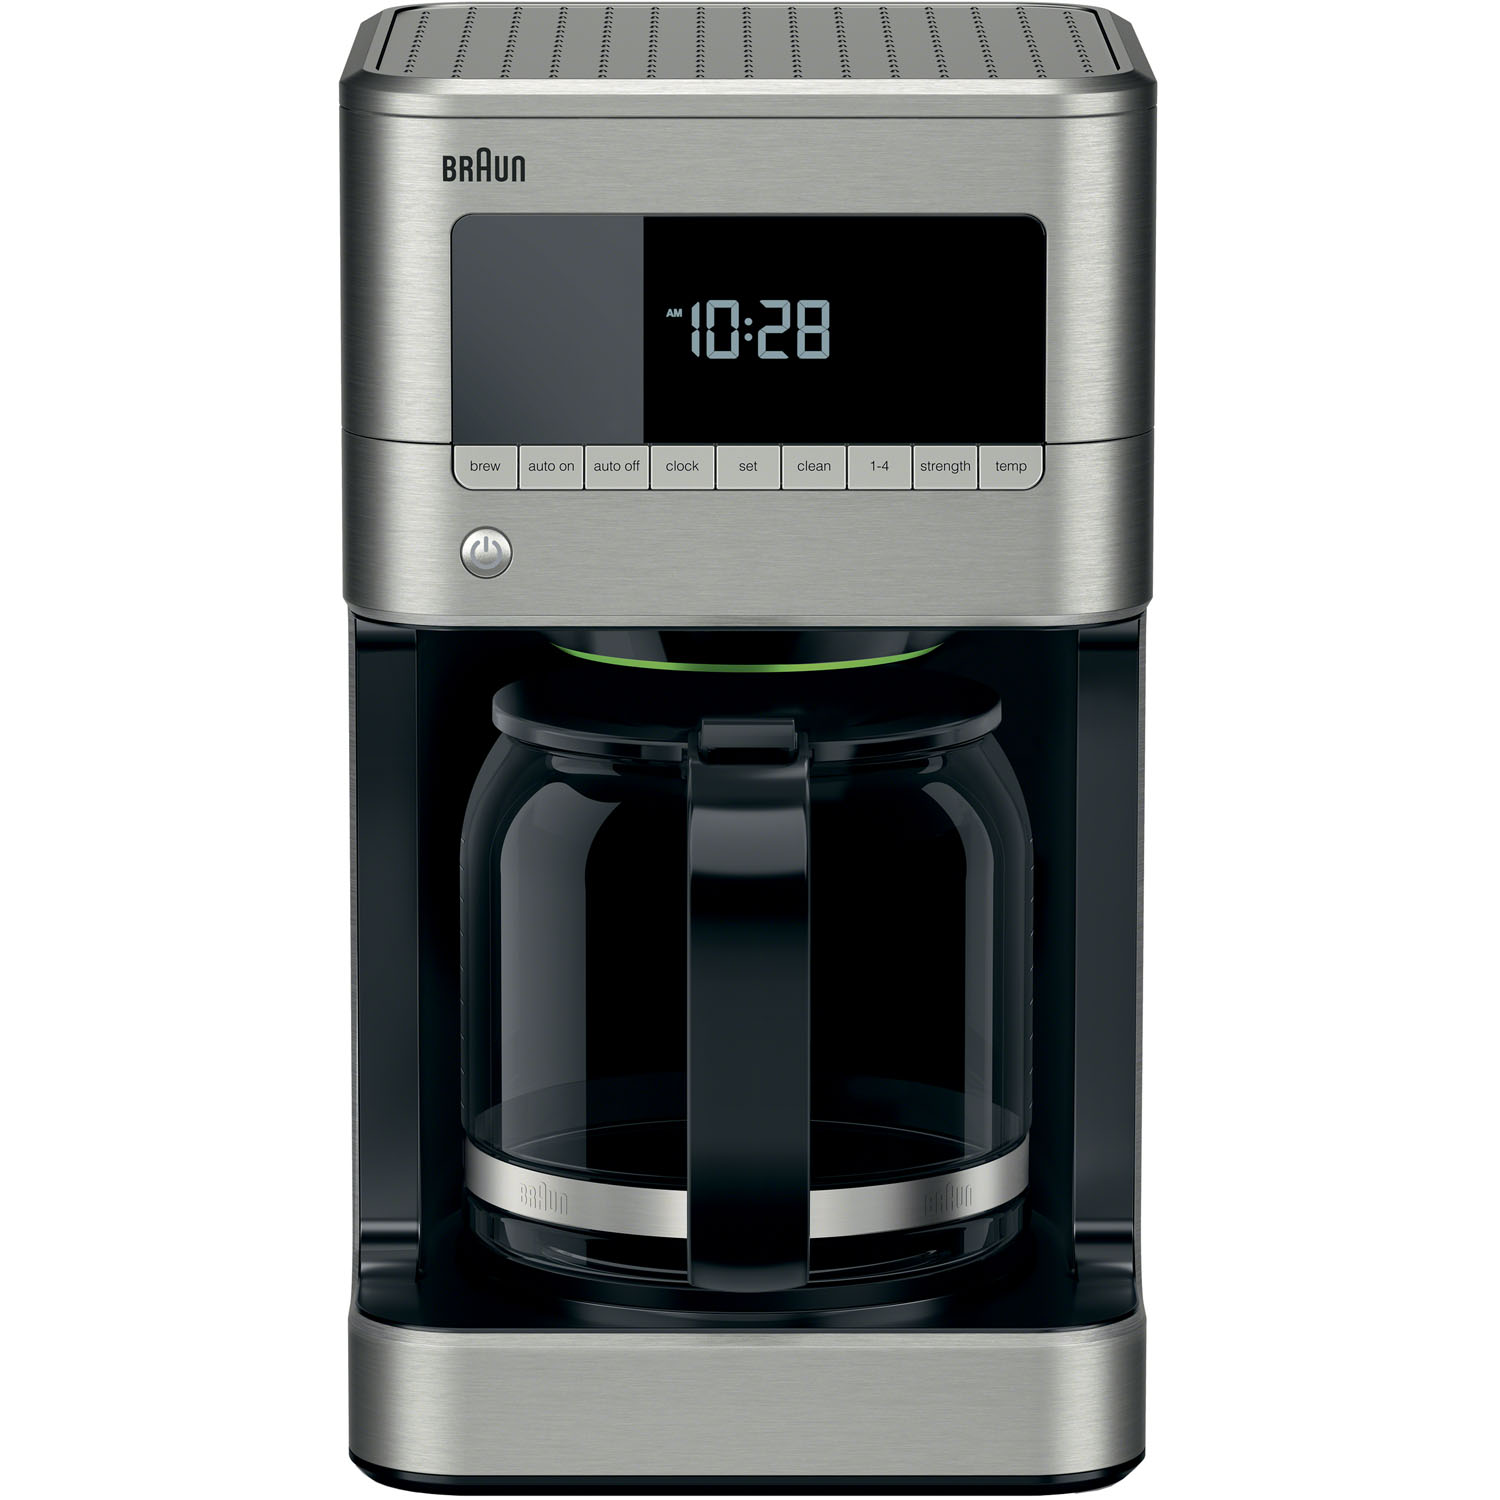 Braun Brew Sense 12-Cup Drip Coffee Maker with Glass Carafe - image 1 of 5